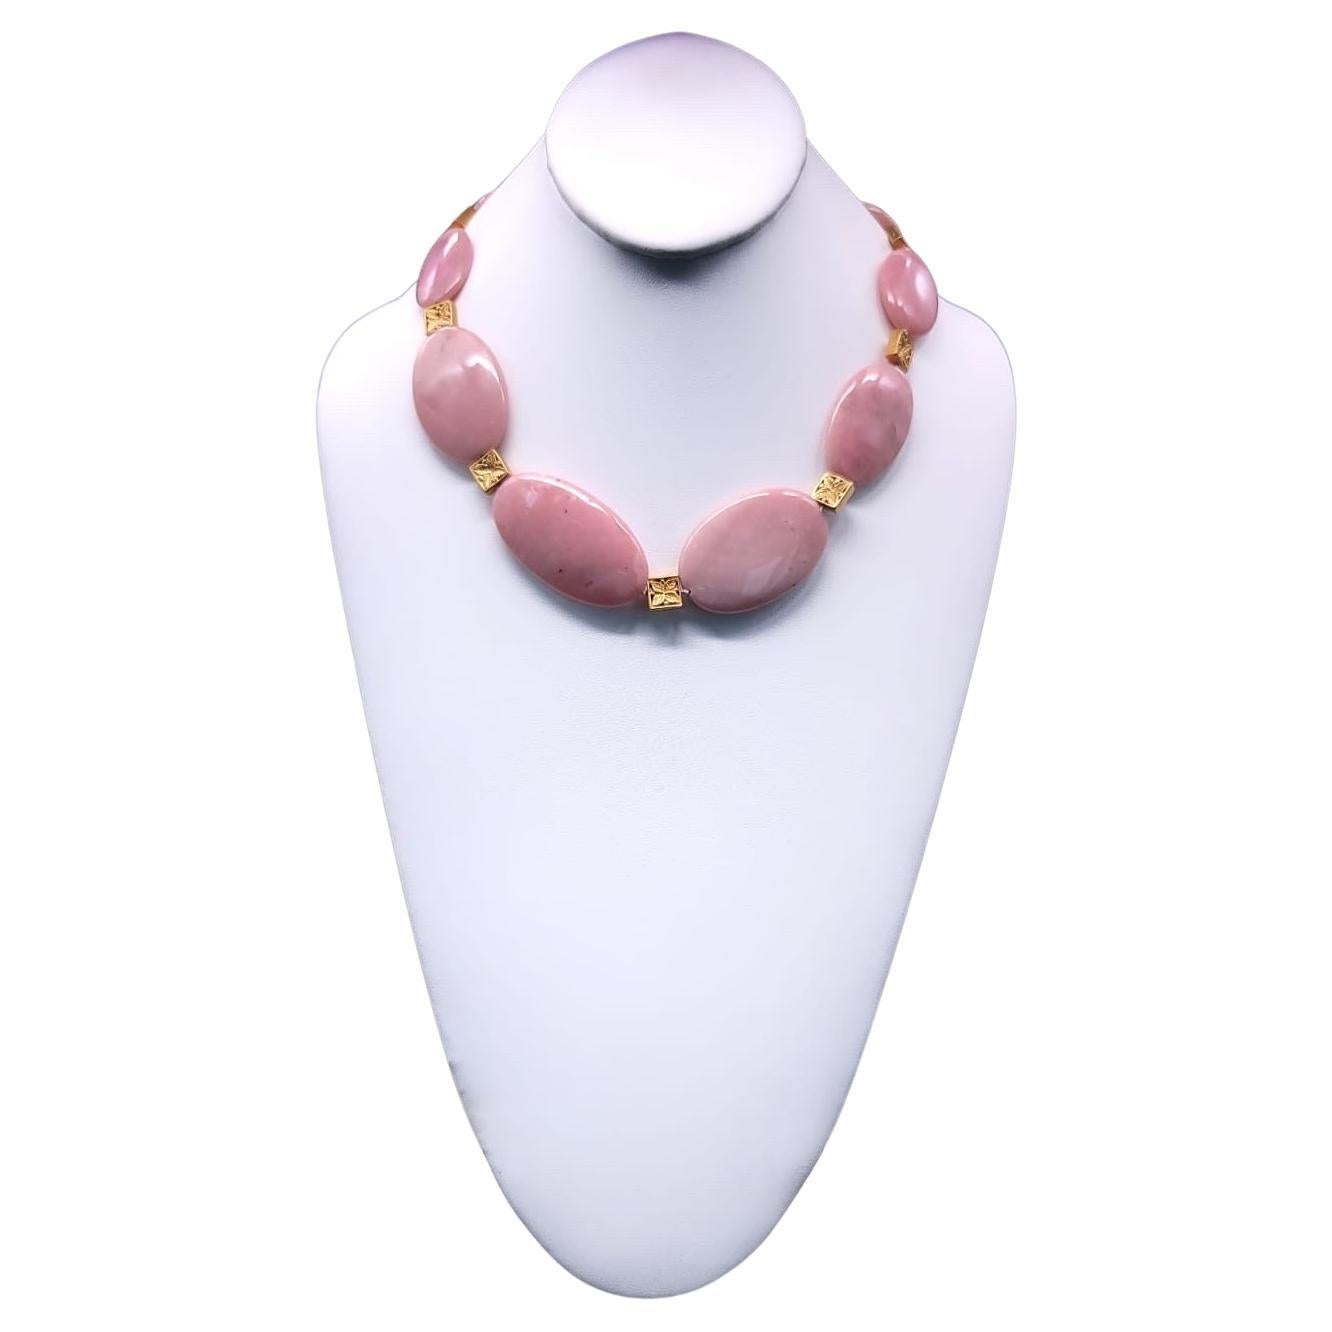 A.Jeschel Polished Oval Pink Peruvian Opal necklace . For Sale